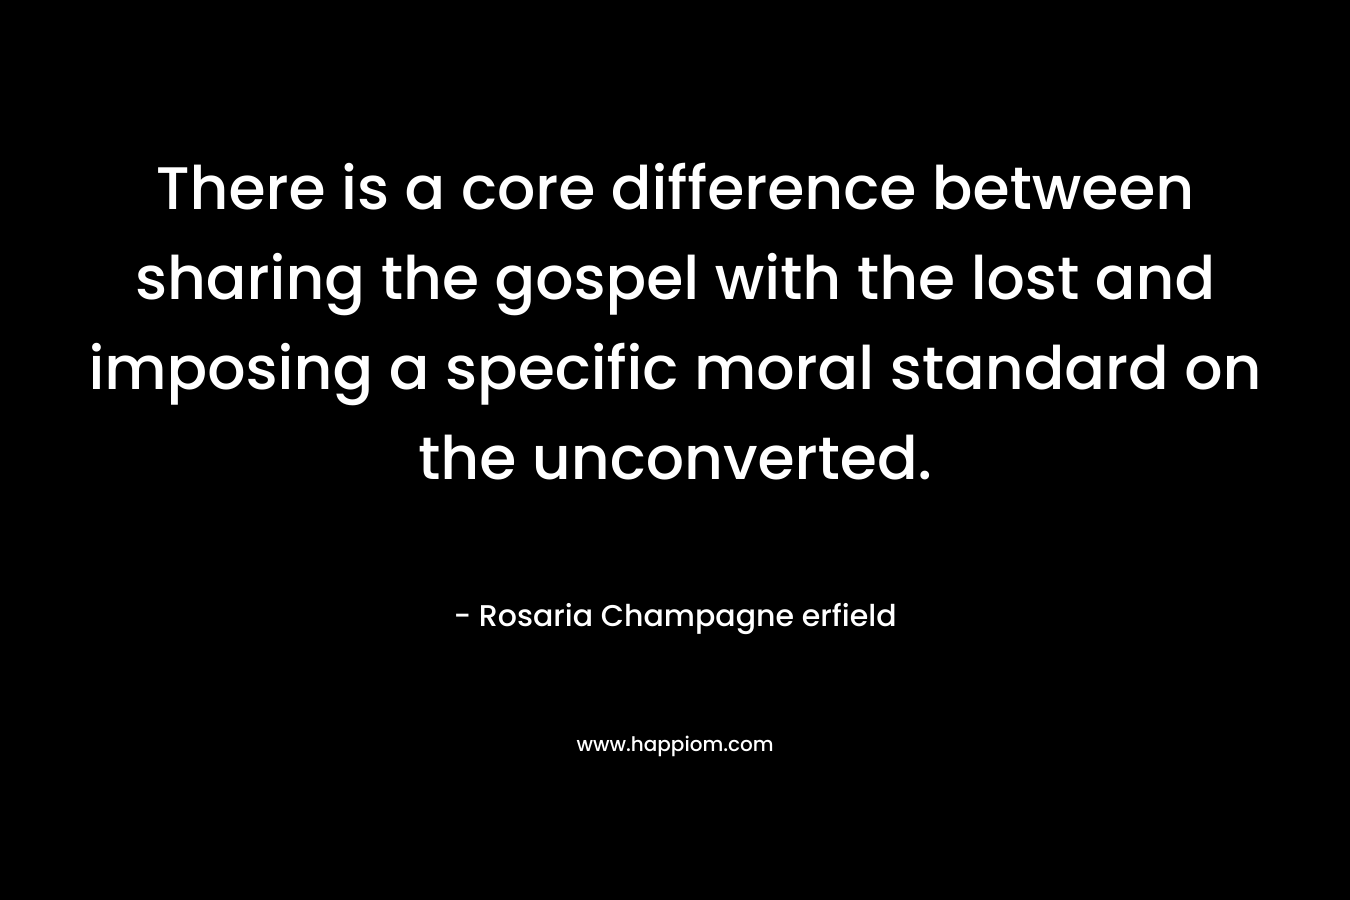 There is a core difference between sharing the gospel with the lost and imposing a specific moral standard on the unconverted.